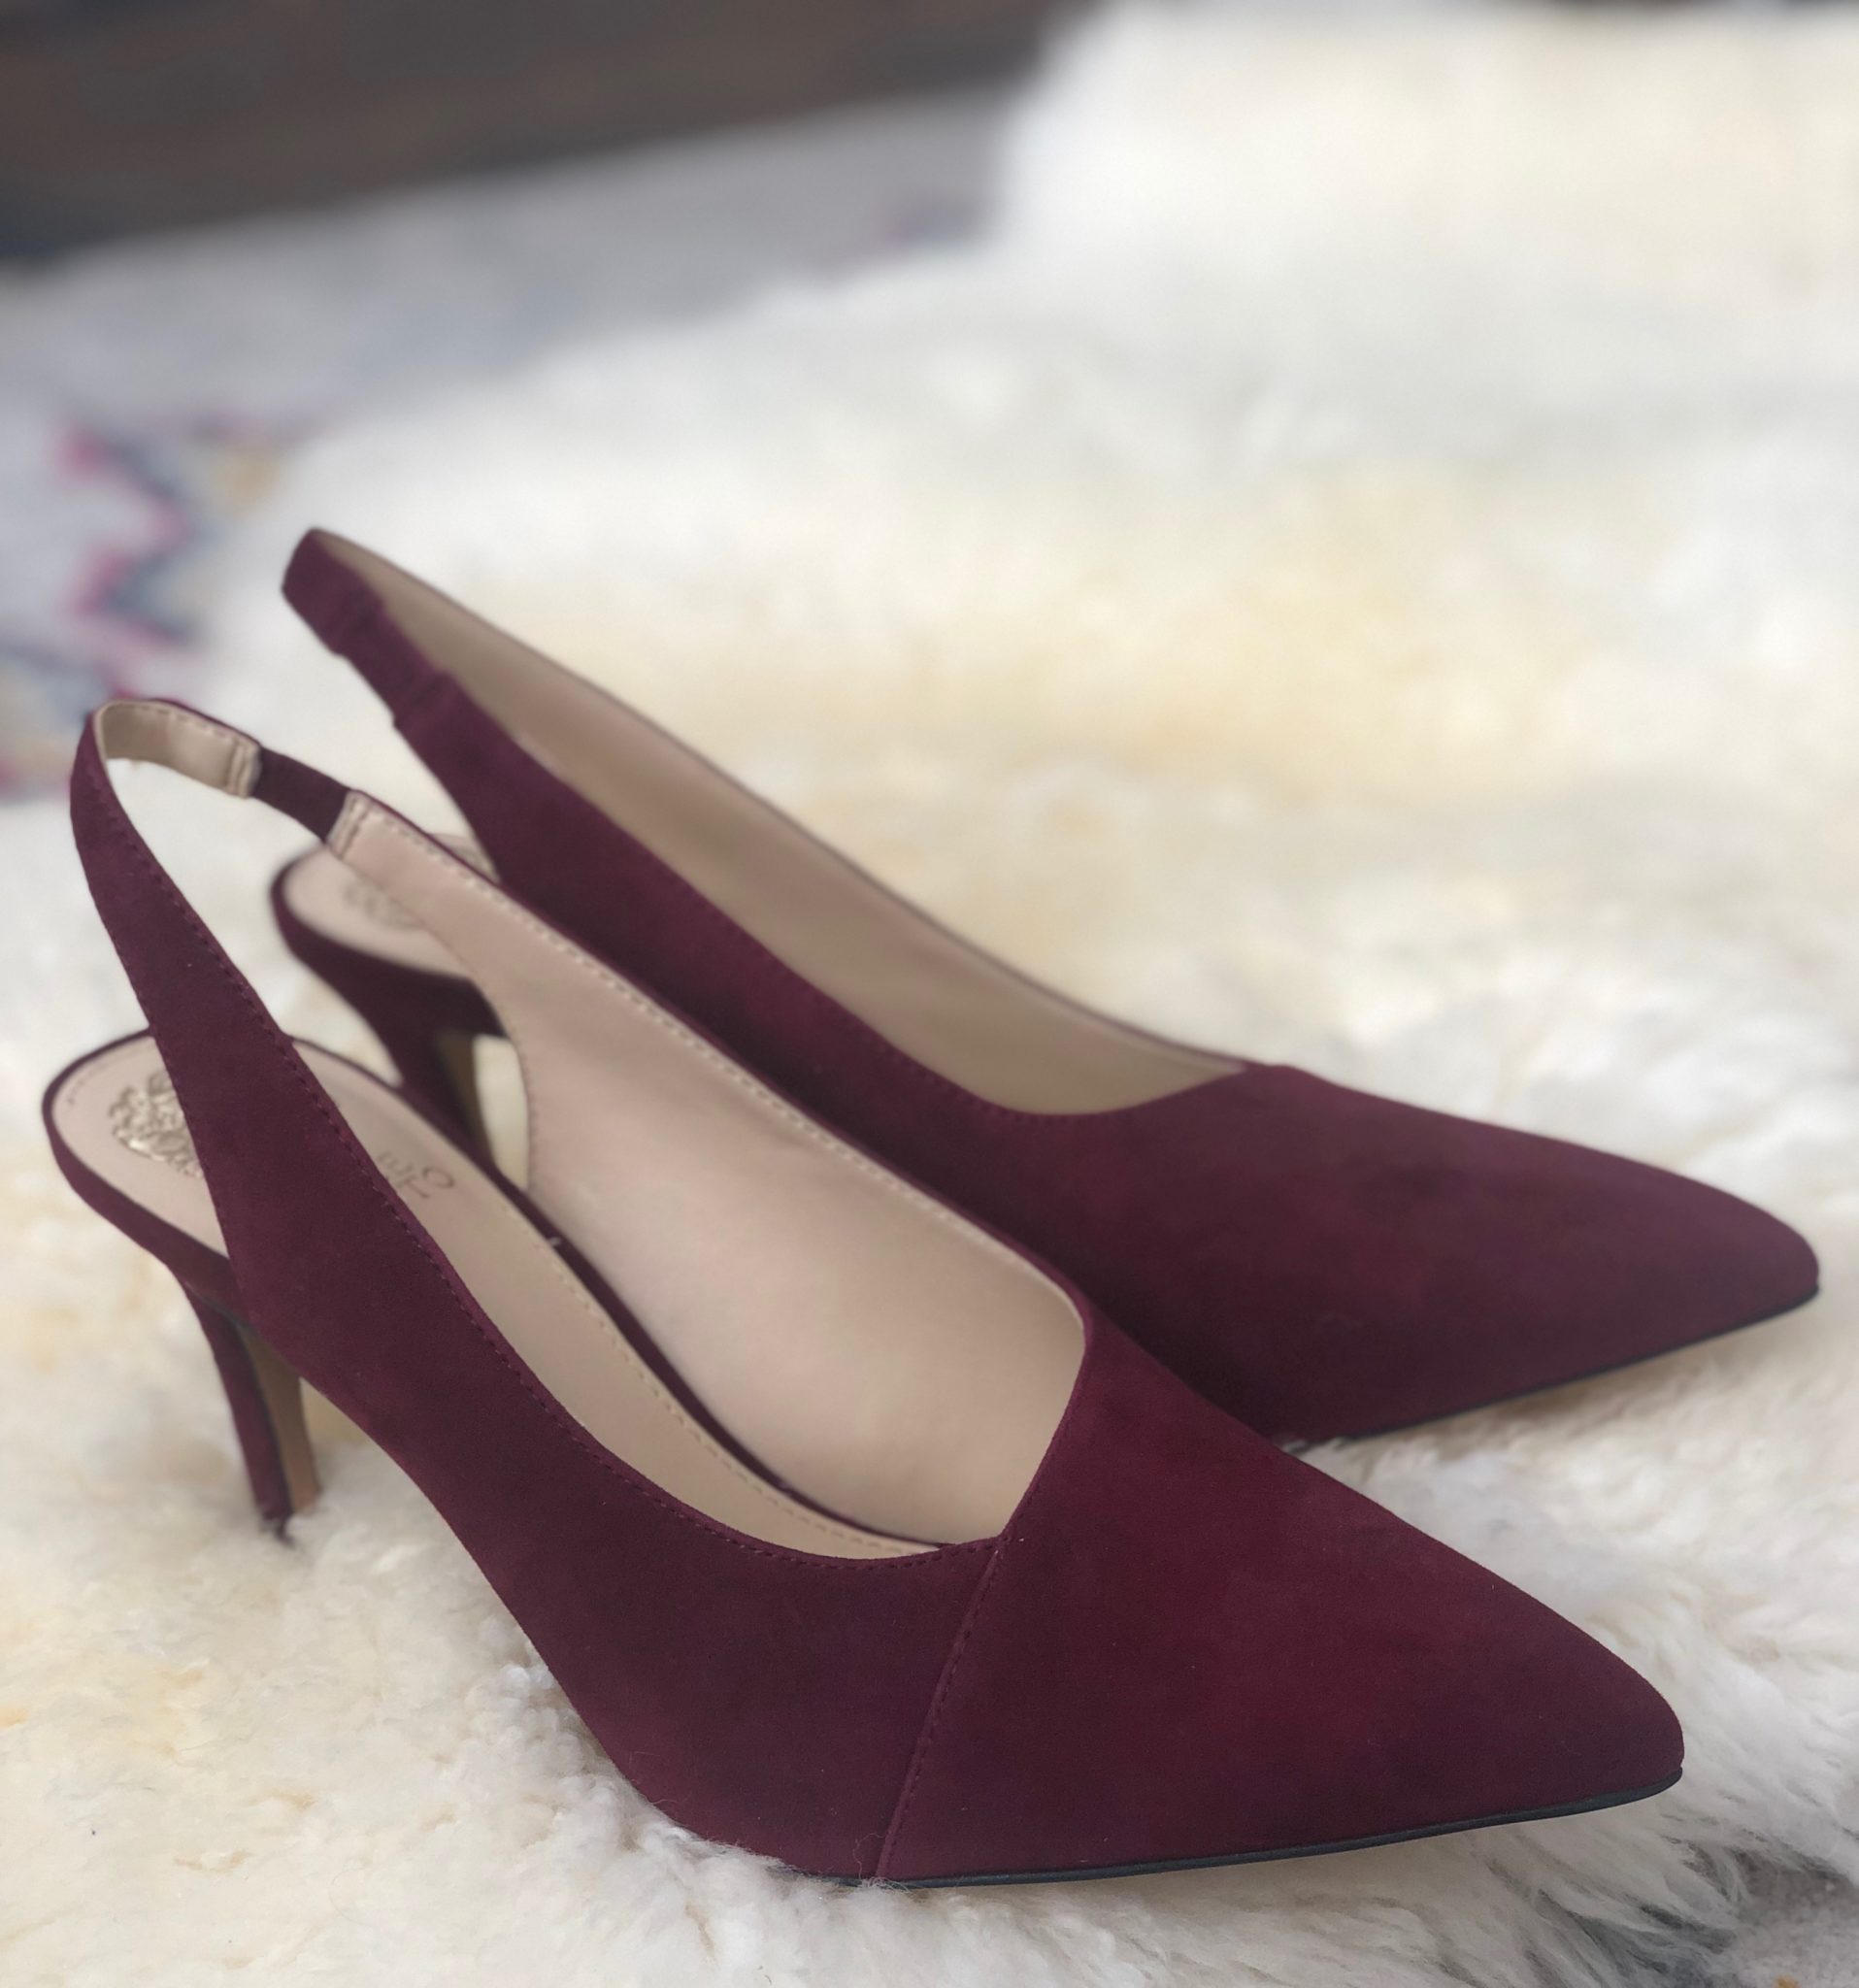 Nordstrom Anniversary Sale: Top Shoes & Accessories Favorites featured by top US fashion blog, Outfits & Outings: image of Vince Camuto sling back pumps